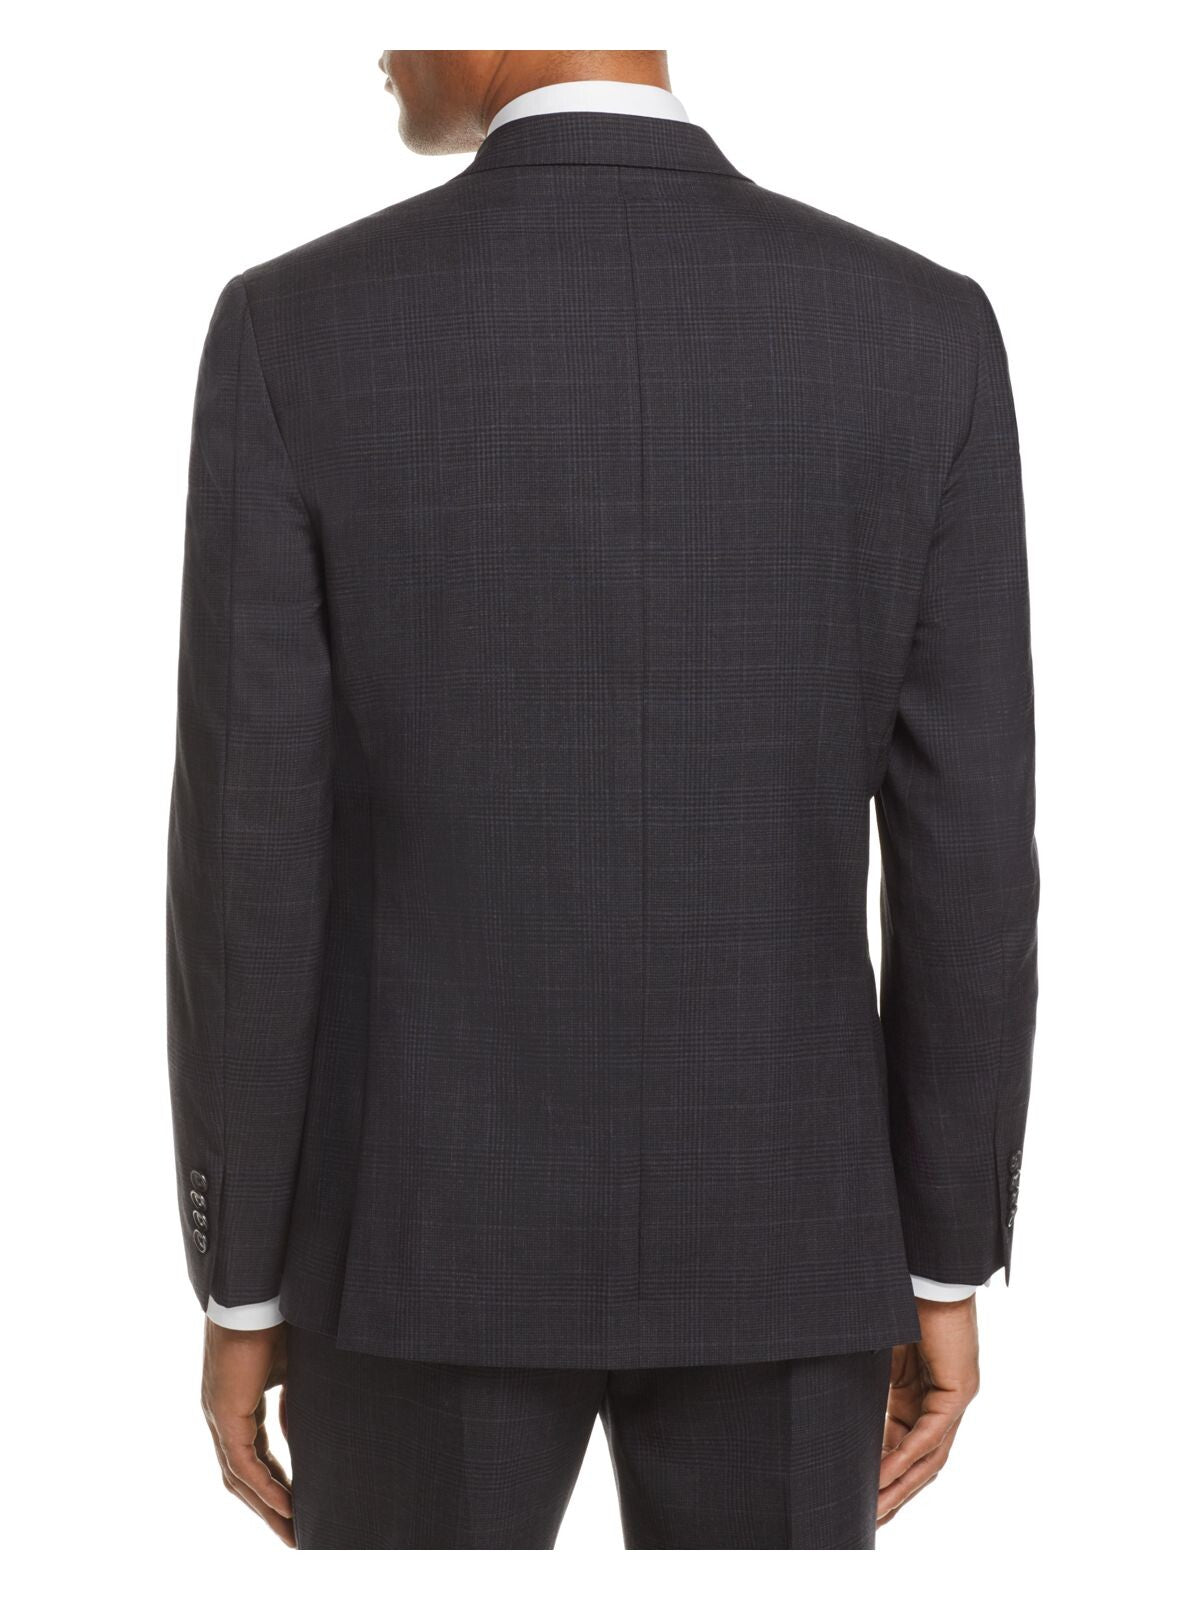 MICHAEL KORS Mens Gray Single Breasted, Stretch, Windowpane Plaid Classic Fit Stretch Suit Separate Blazer Jacket 40S